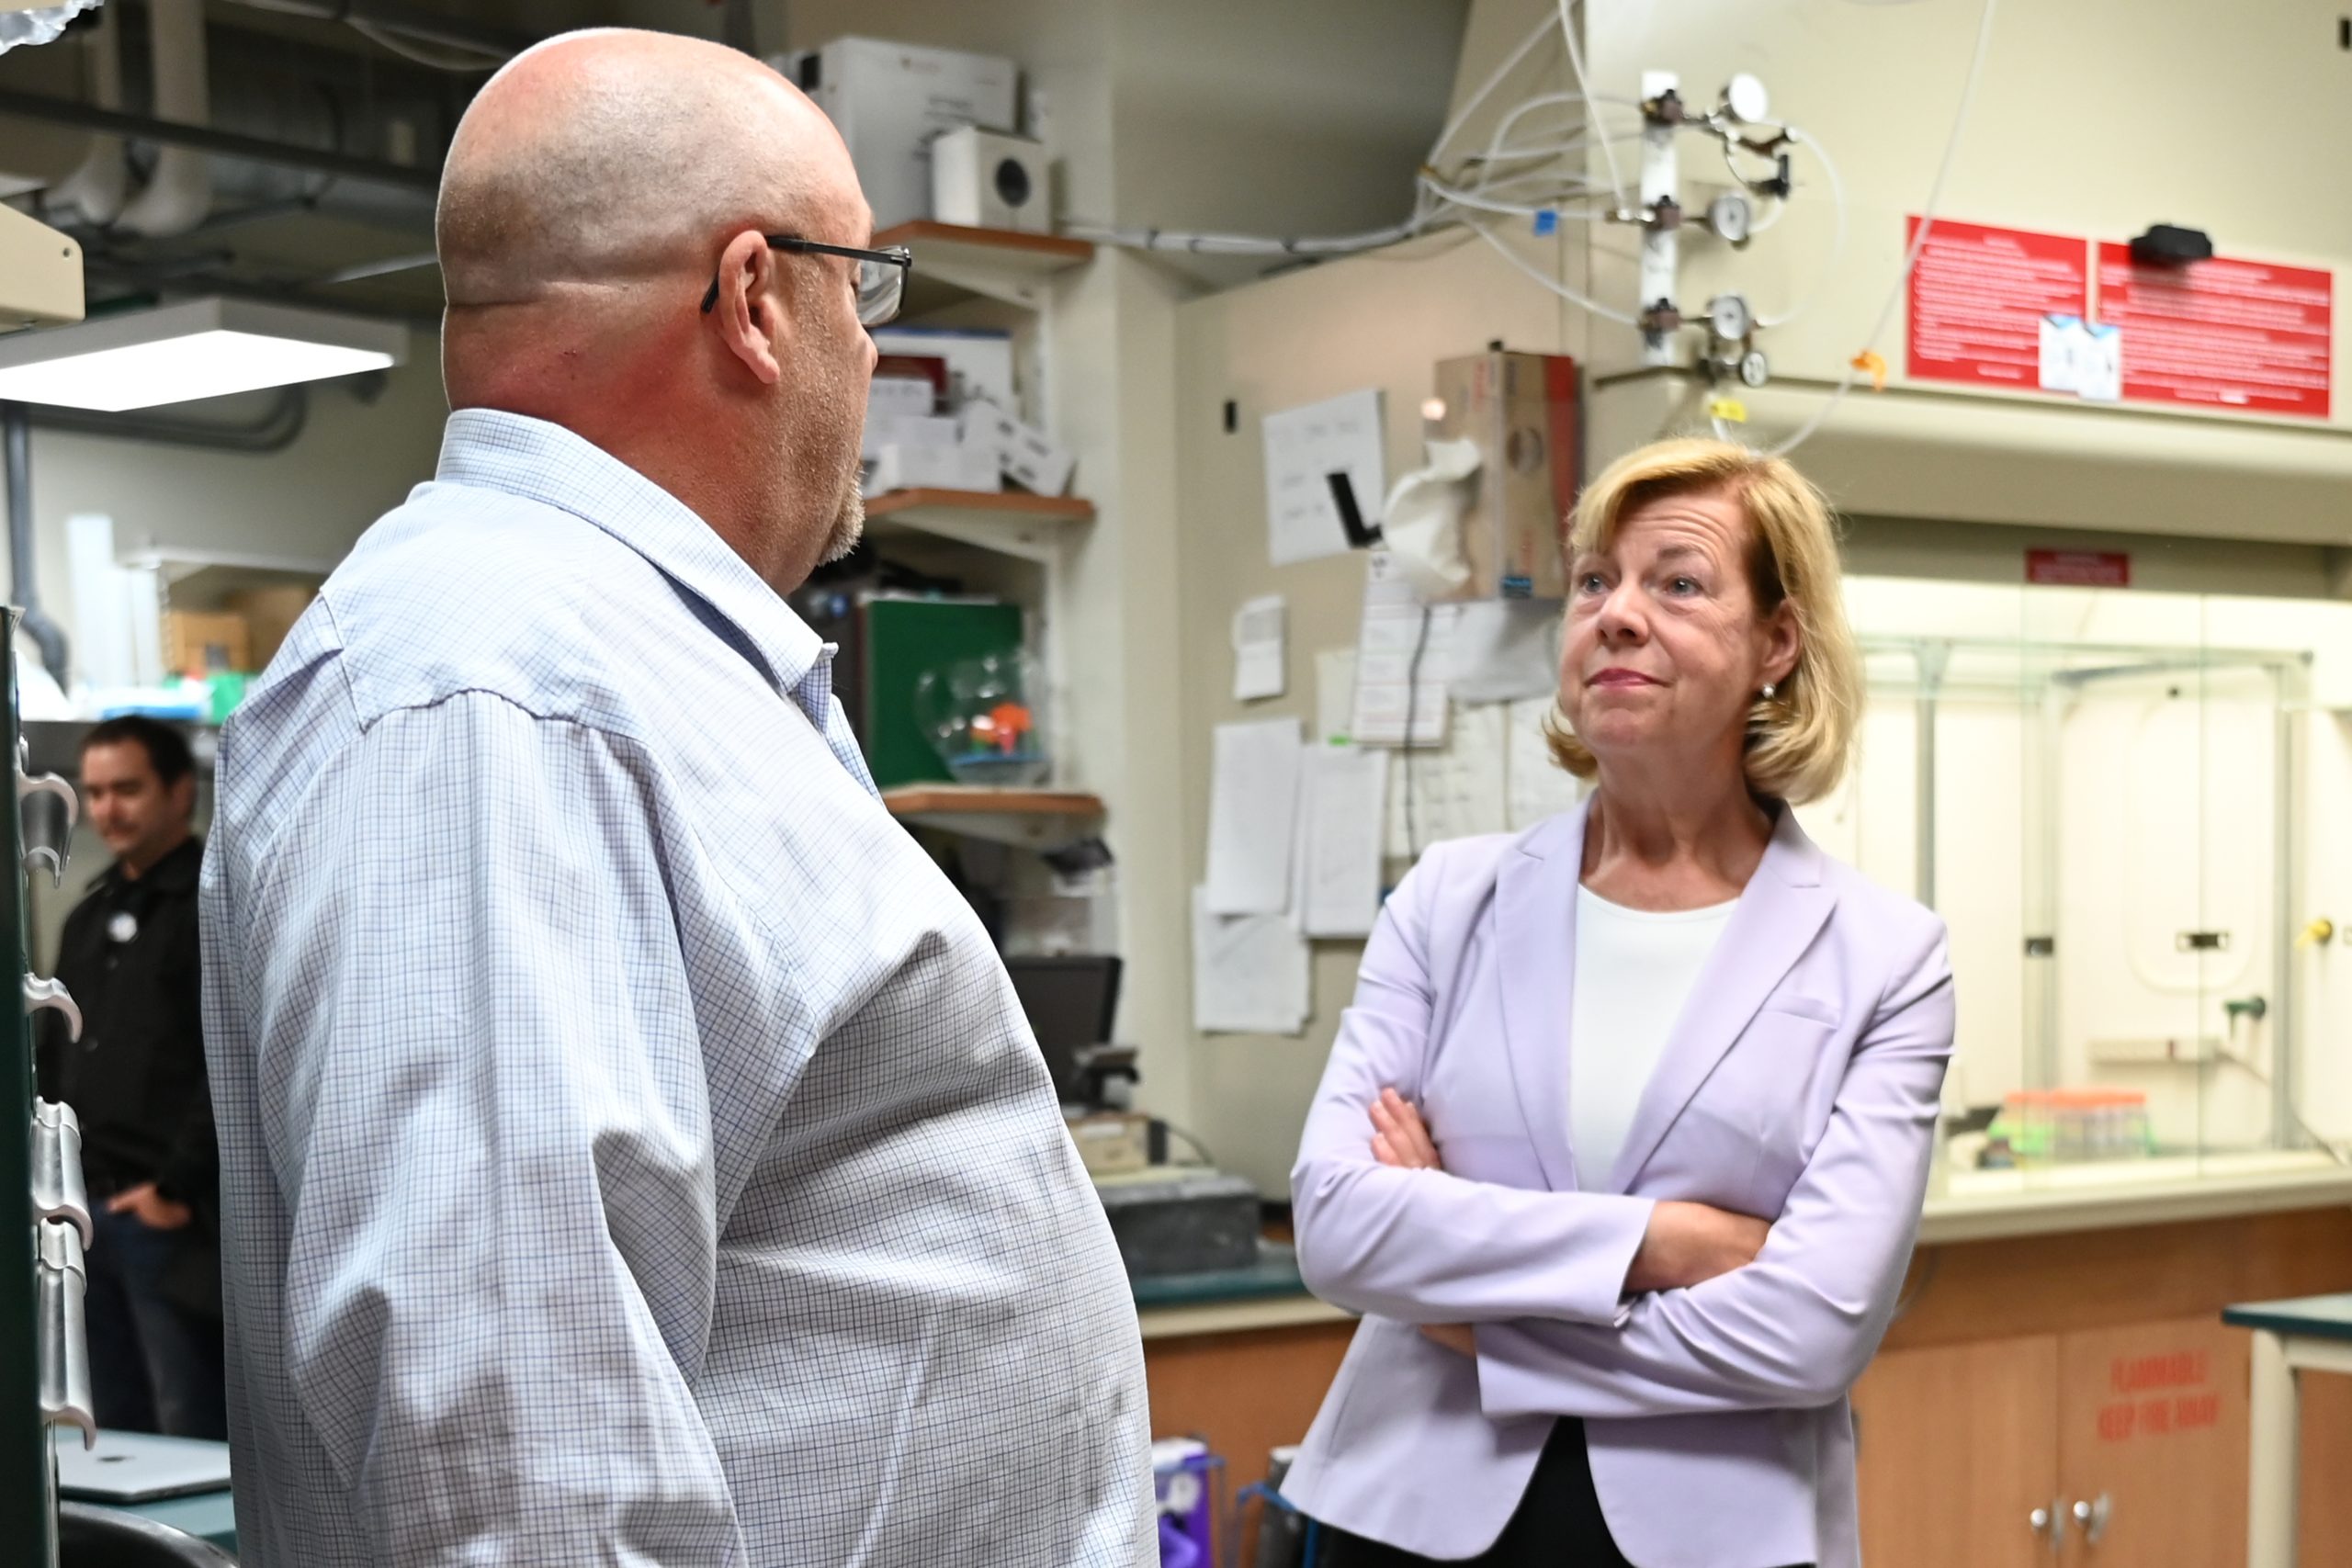 Senator Baldwin stand to the right facing Dr. Barnhardt as he speaks. In the background is lab equipment and personnel.